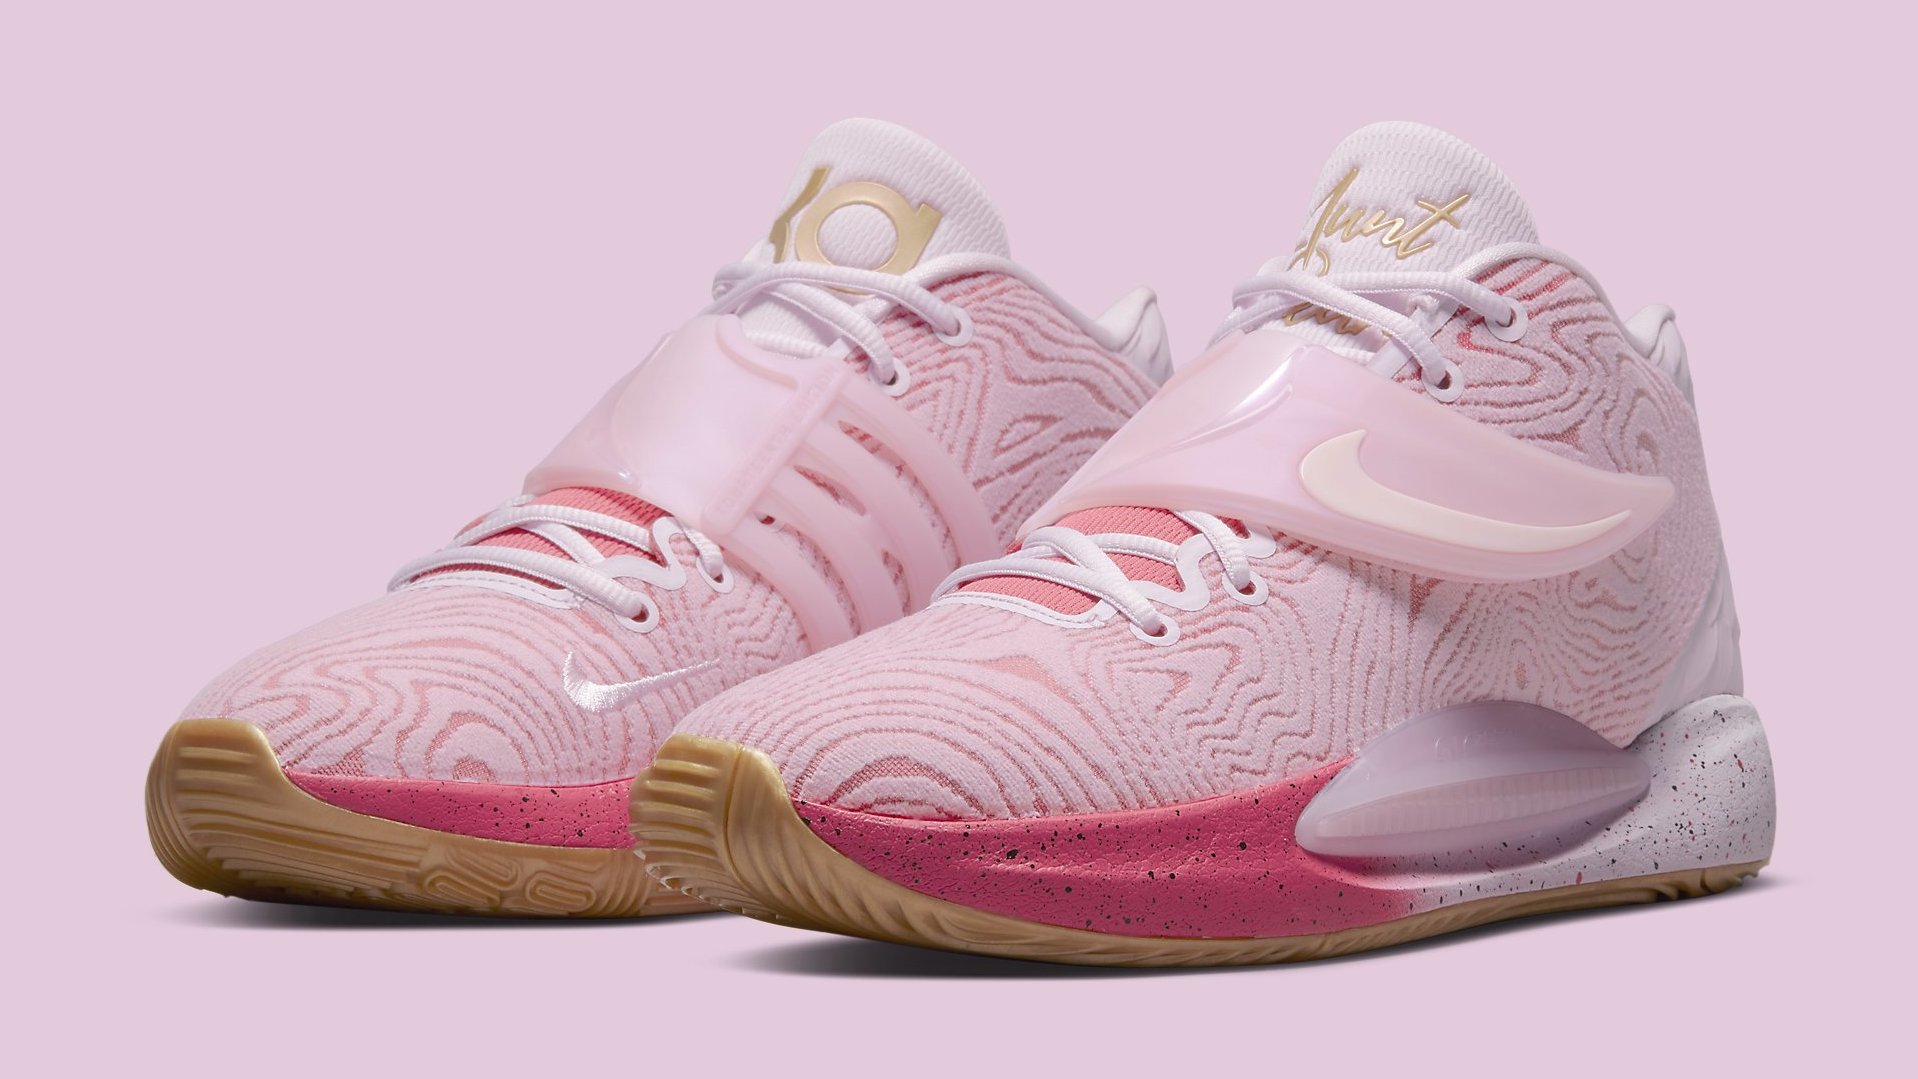 Nike KD 14 'Aunt Pearl' DC9379-600 Release Date & Images | Sole Collector